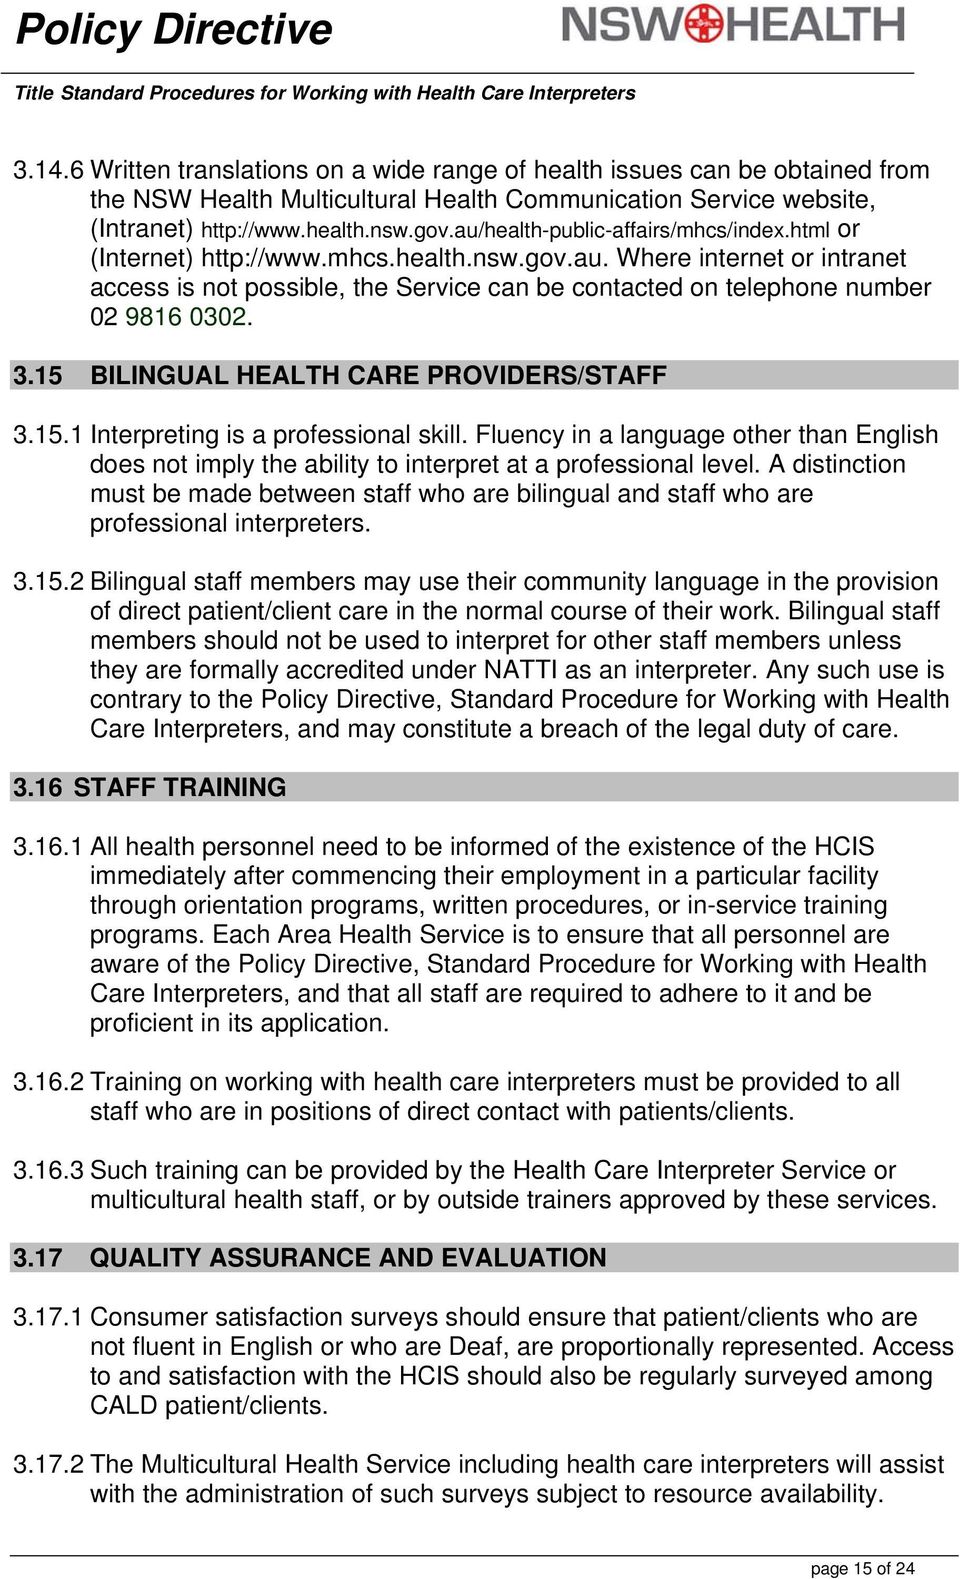 3.15 BILINGUAL HEALTH CARE PROVIDERS/STAFF 3.15.1 Interpreting is a professional skill. Fluency in a language other than English does not imply the ability to interpret at a professional level.